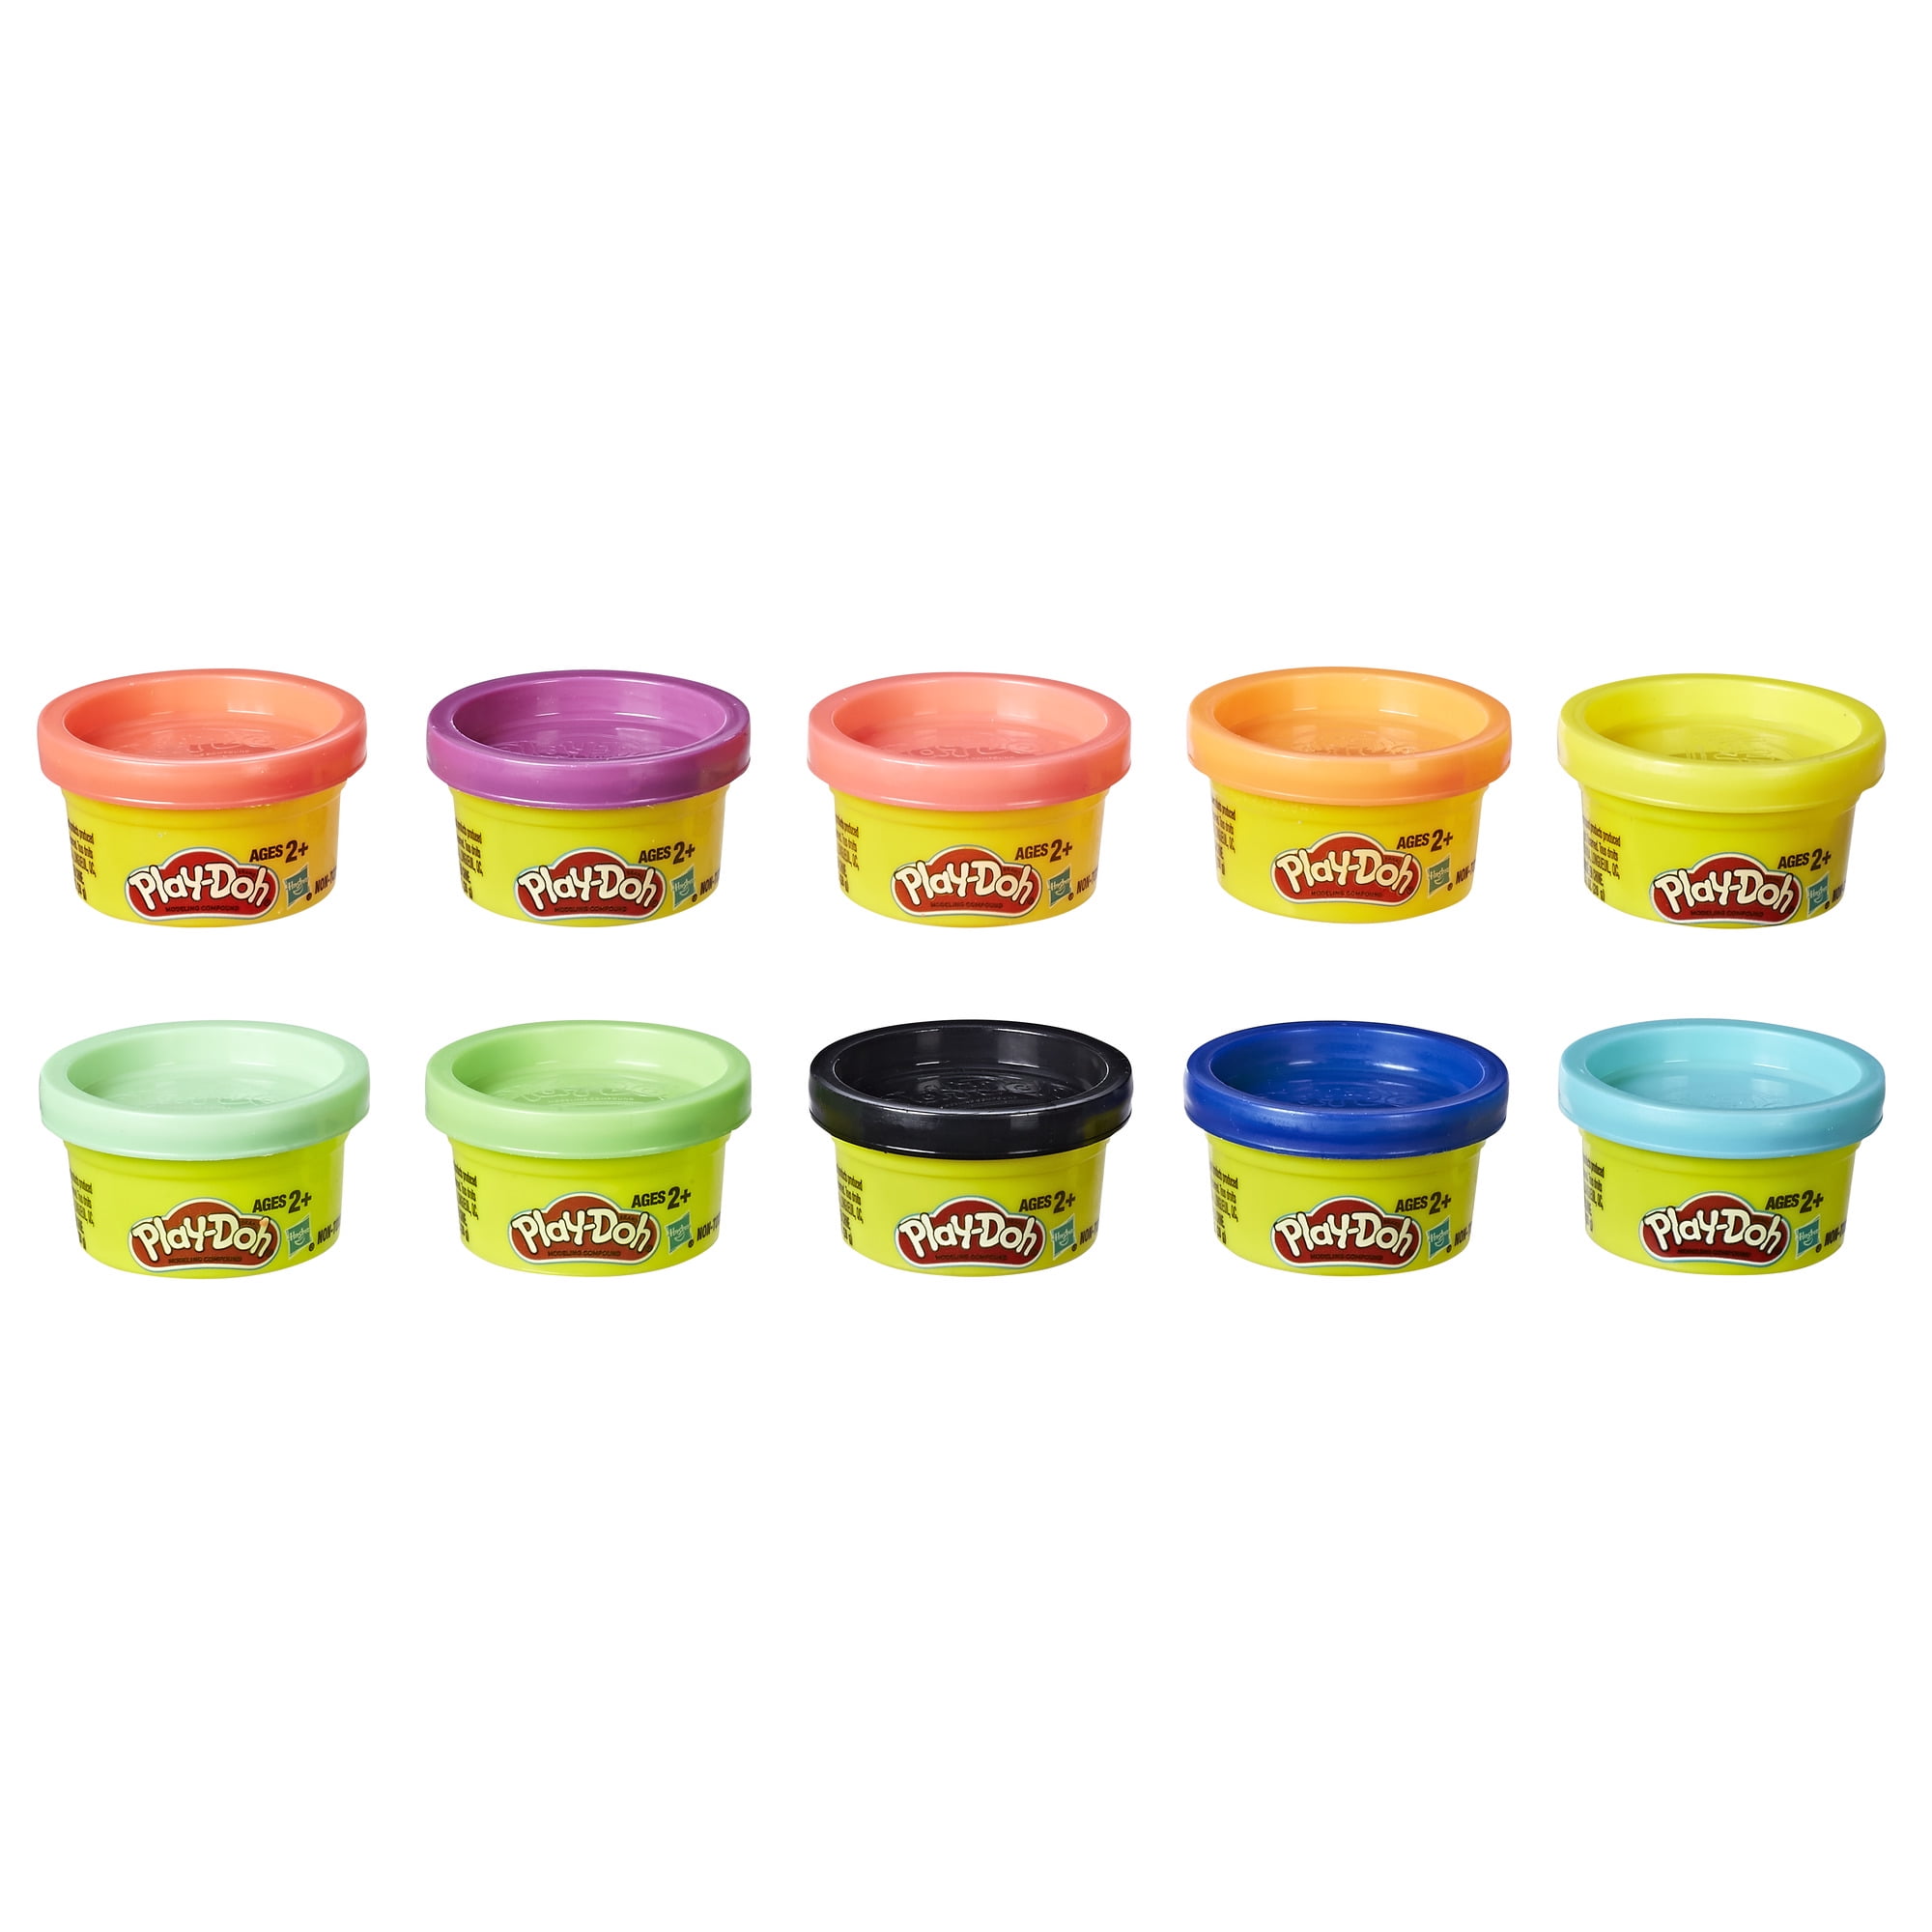 Hsb22037c 1 Oz Play-doh Party Pack - Pack Of 10